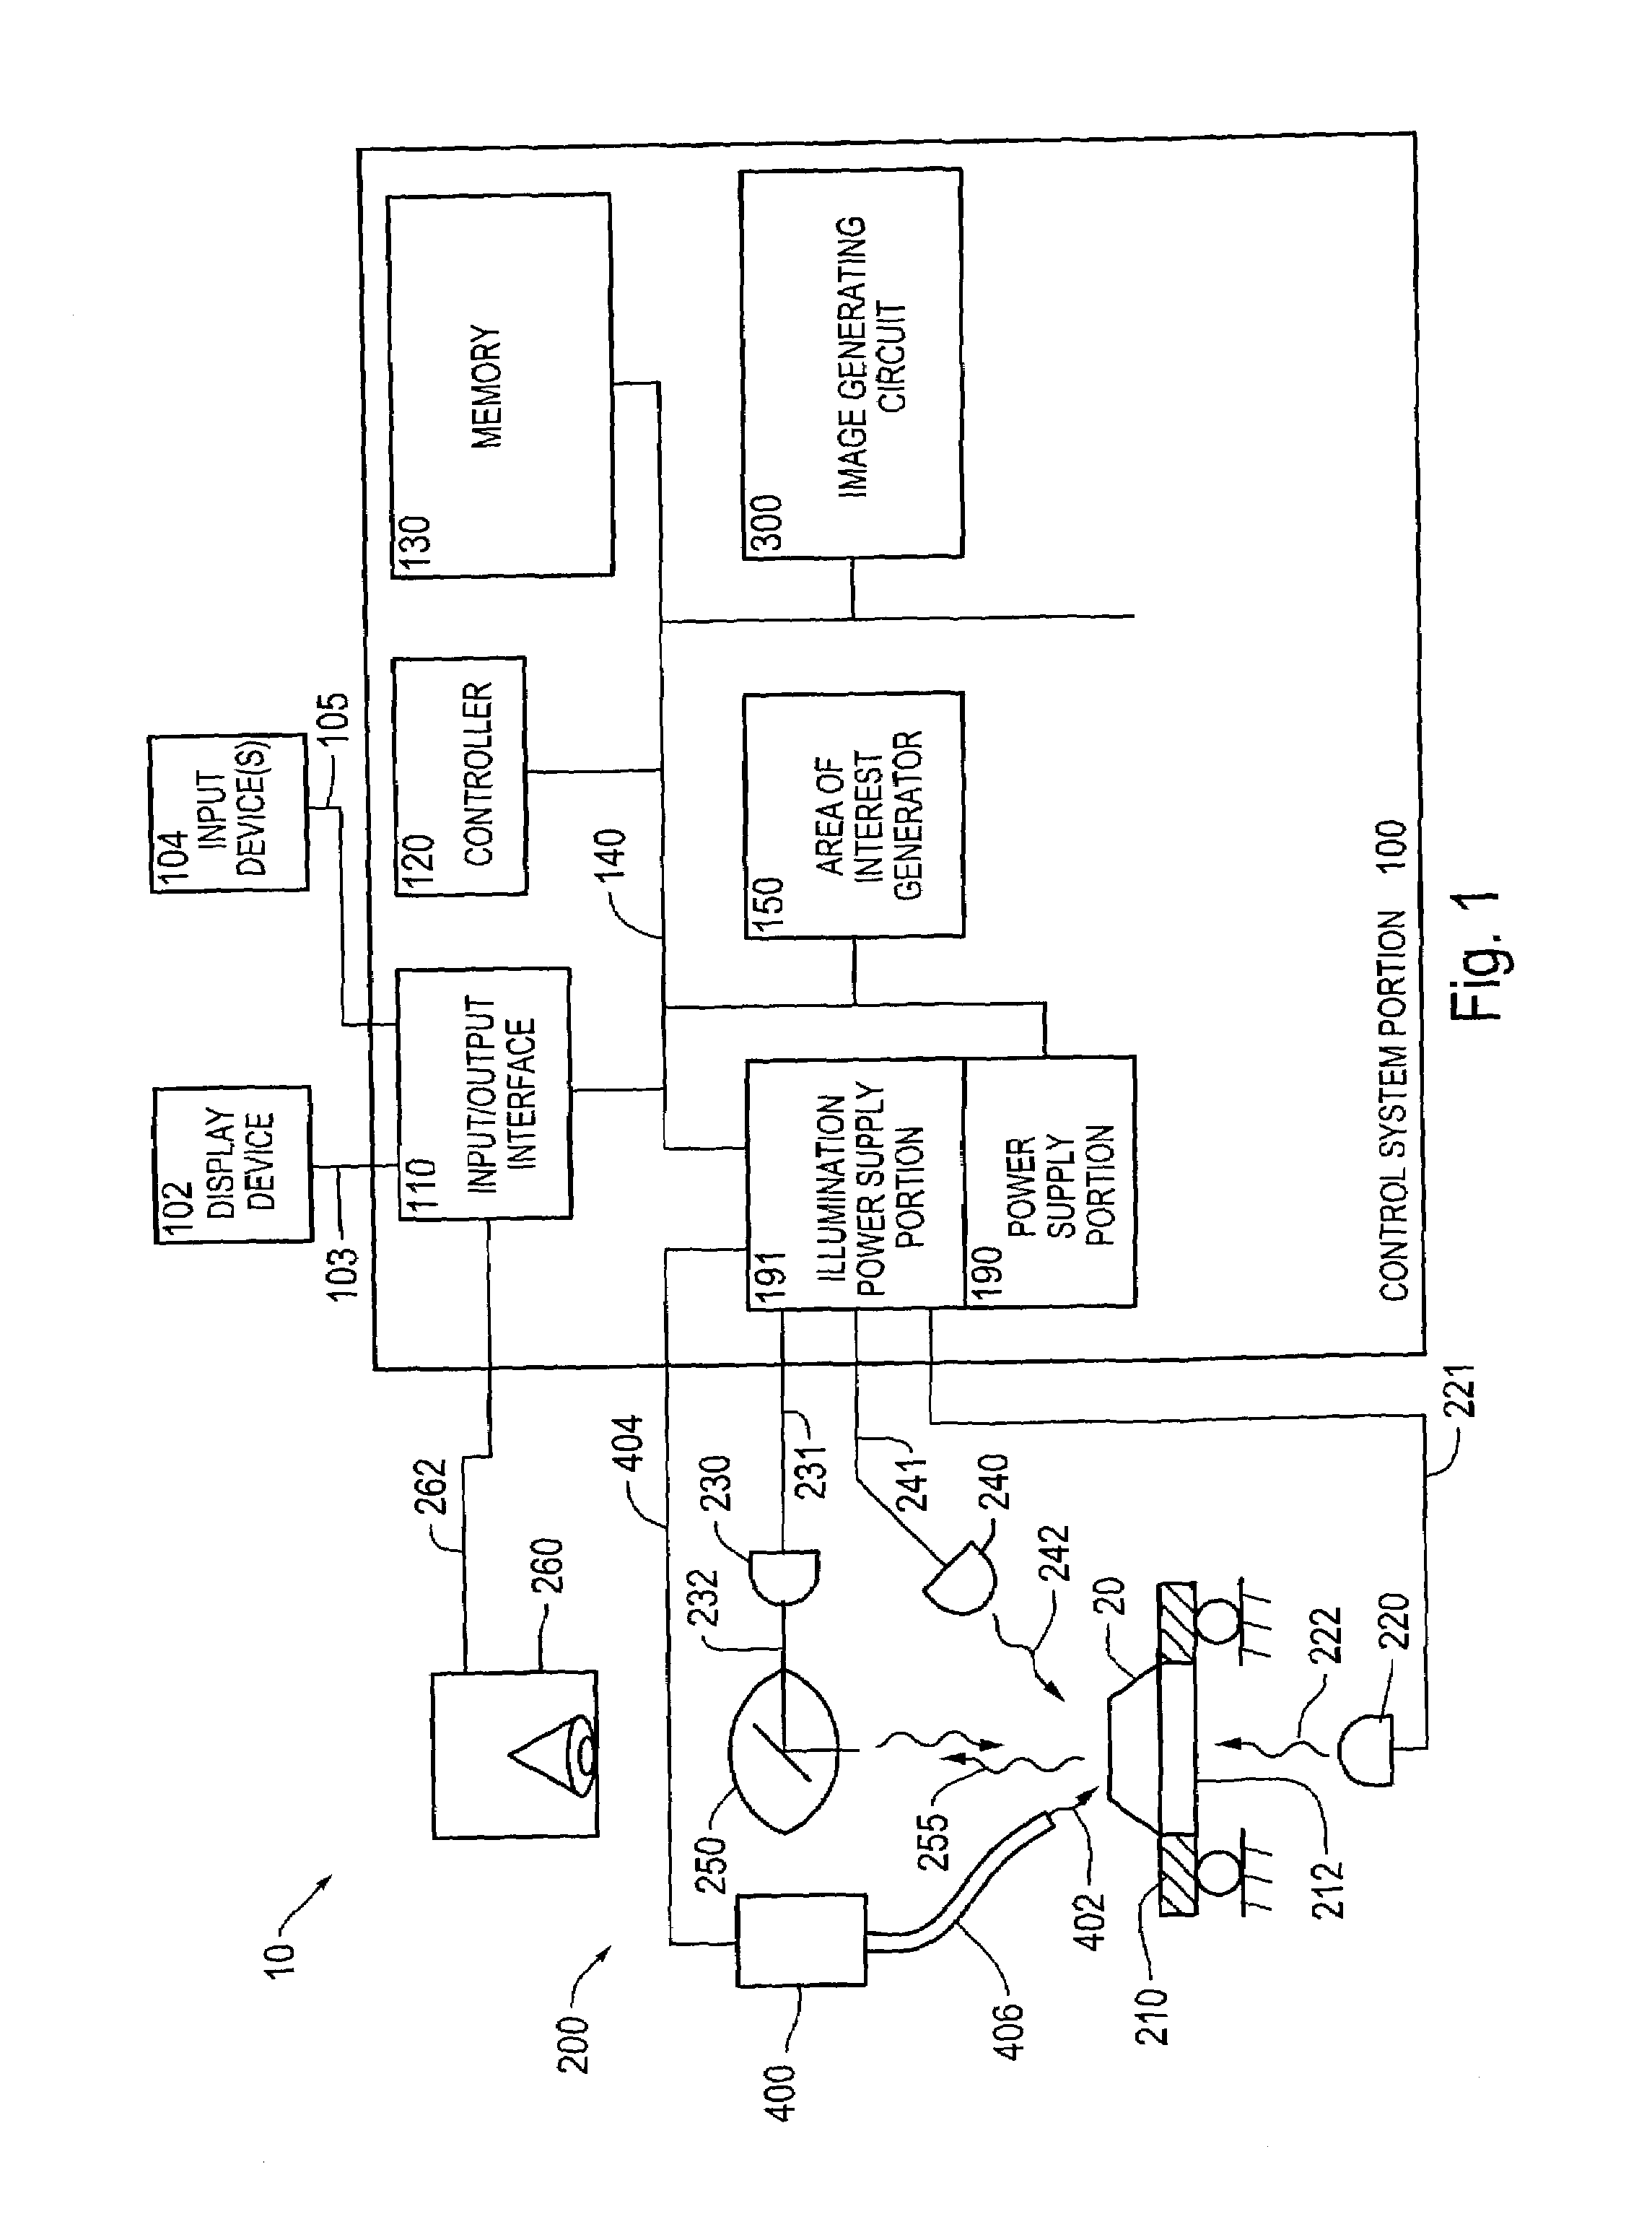 Systems and methods for continuously varying wavelength illumination